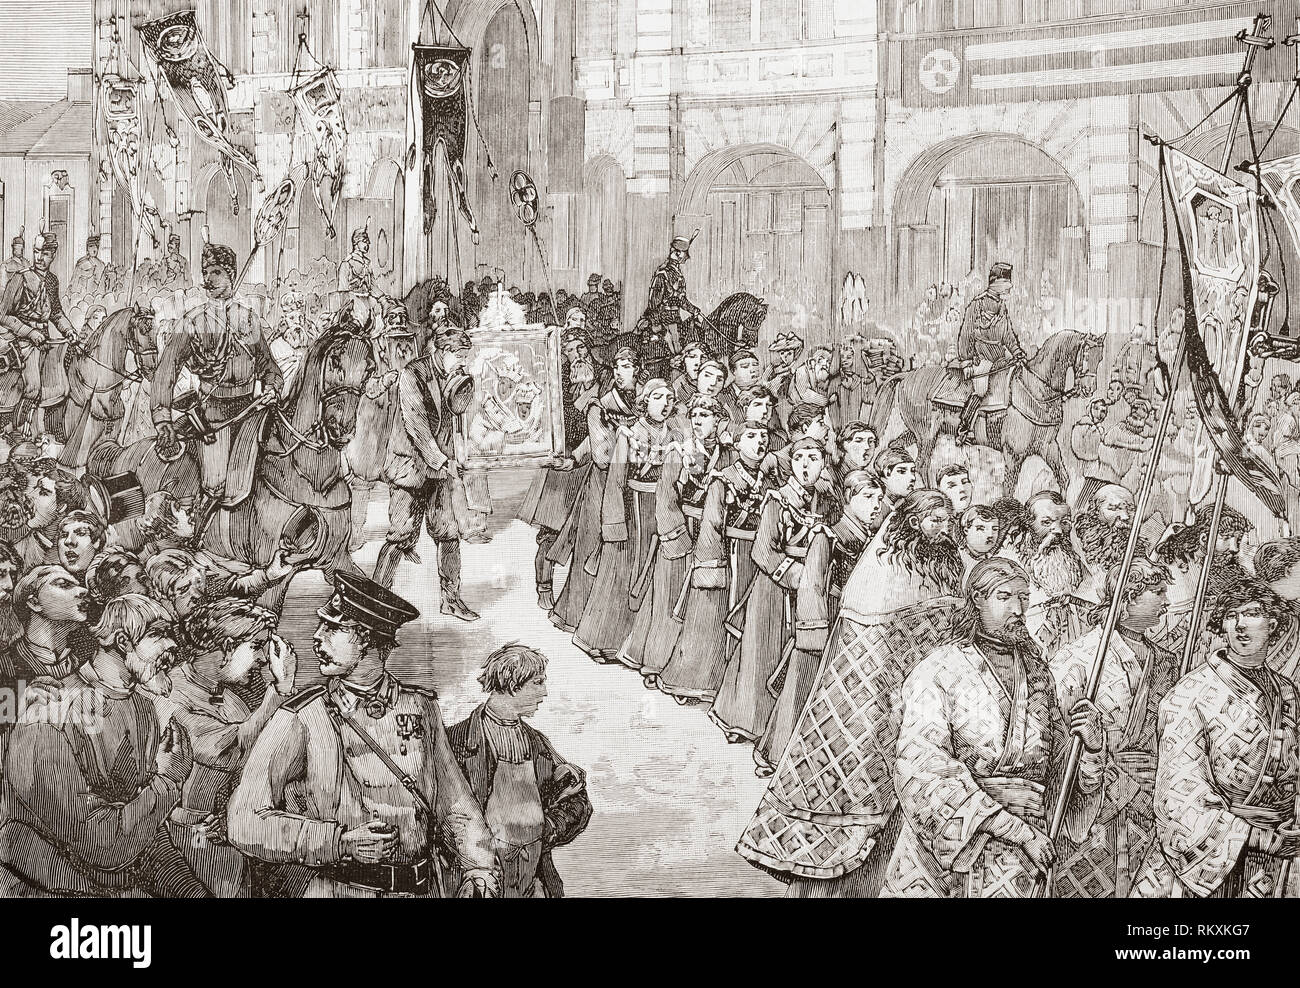 The fifth cholera pandemic, 1881-1896. A religious procession in Saint Petersburg, Russia in 1892 to pray for the disappearance of Cholera.  From La Ilustracion Espanola y Americana, published 1892. Stock Photo